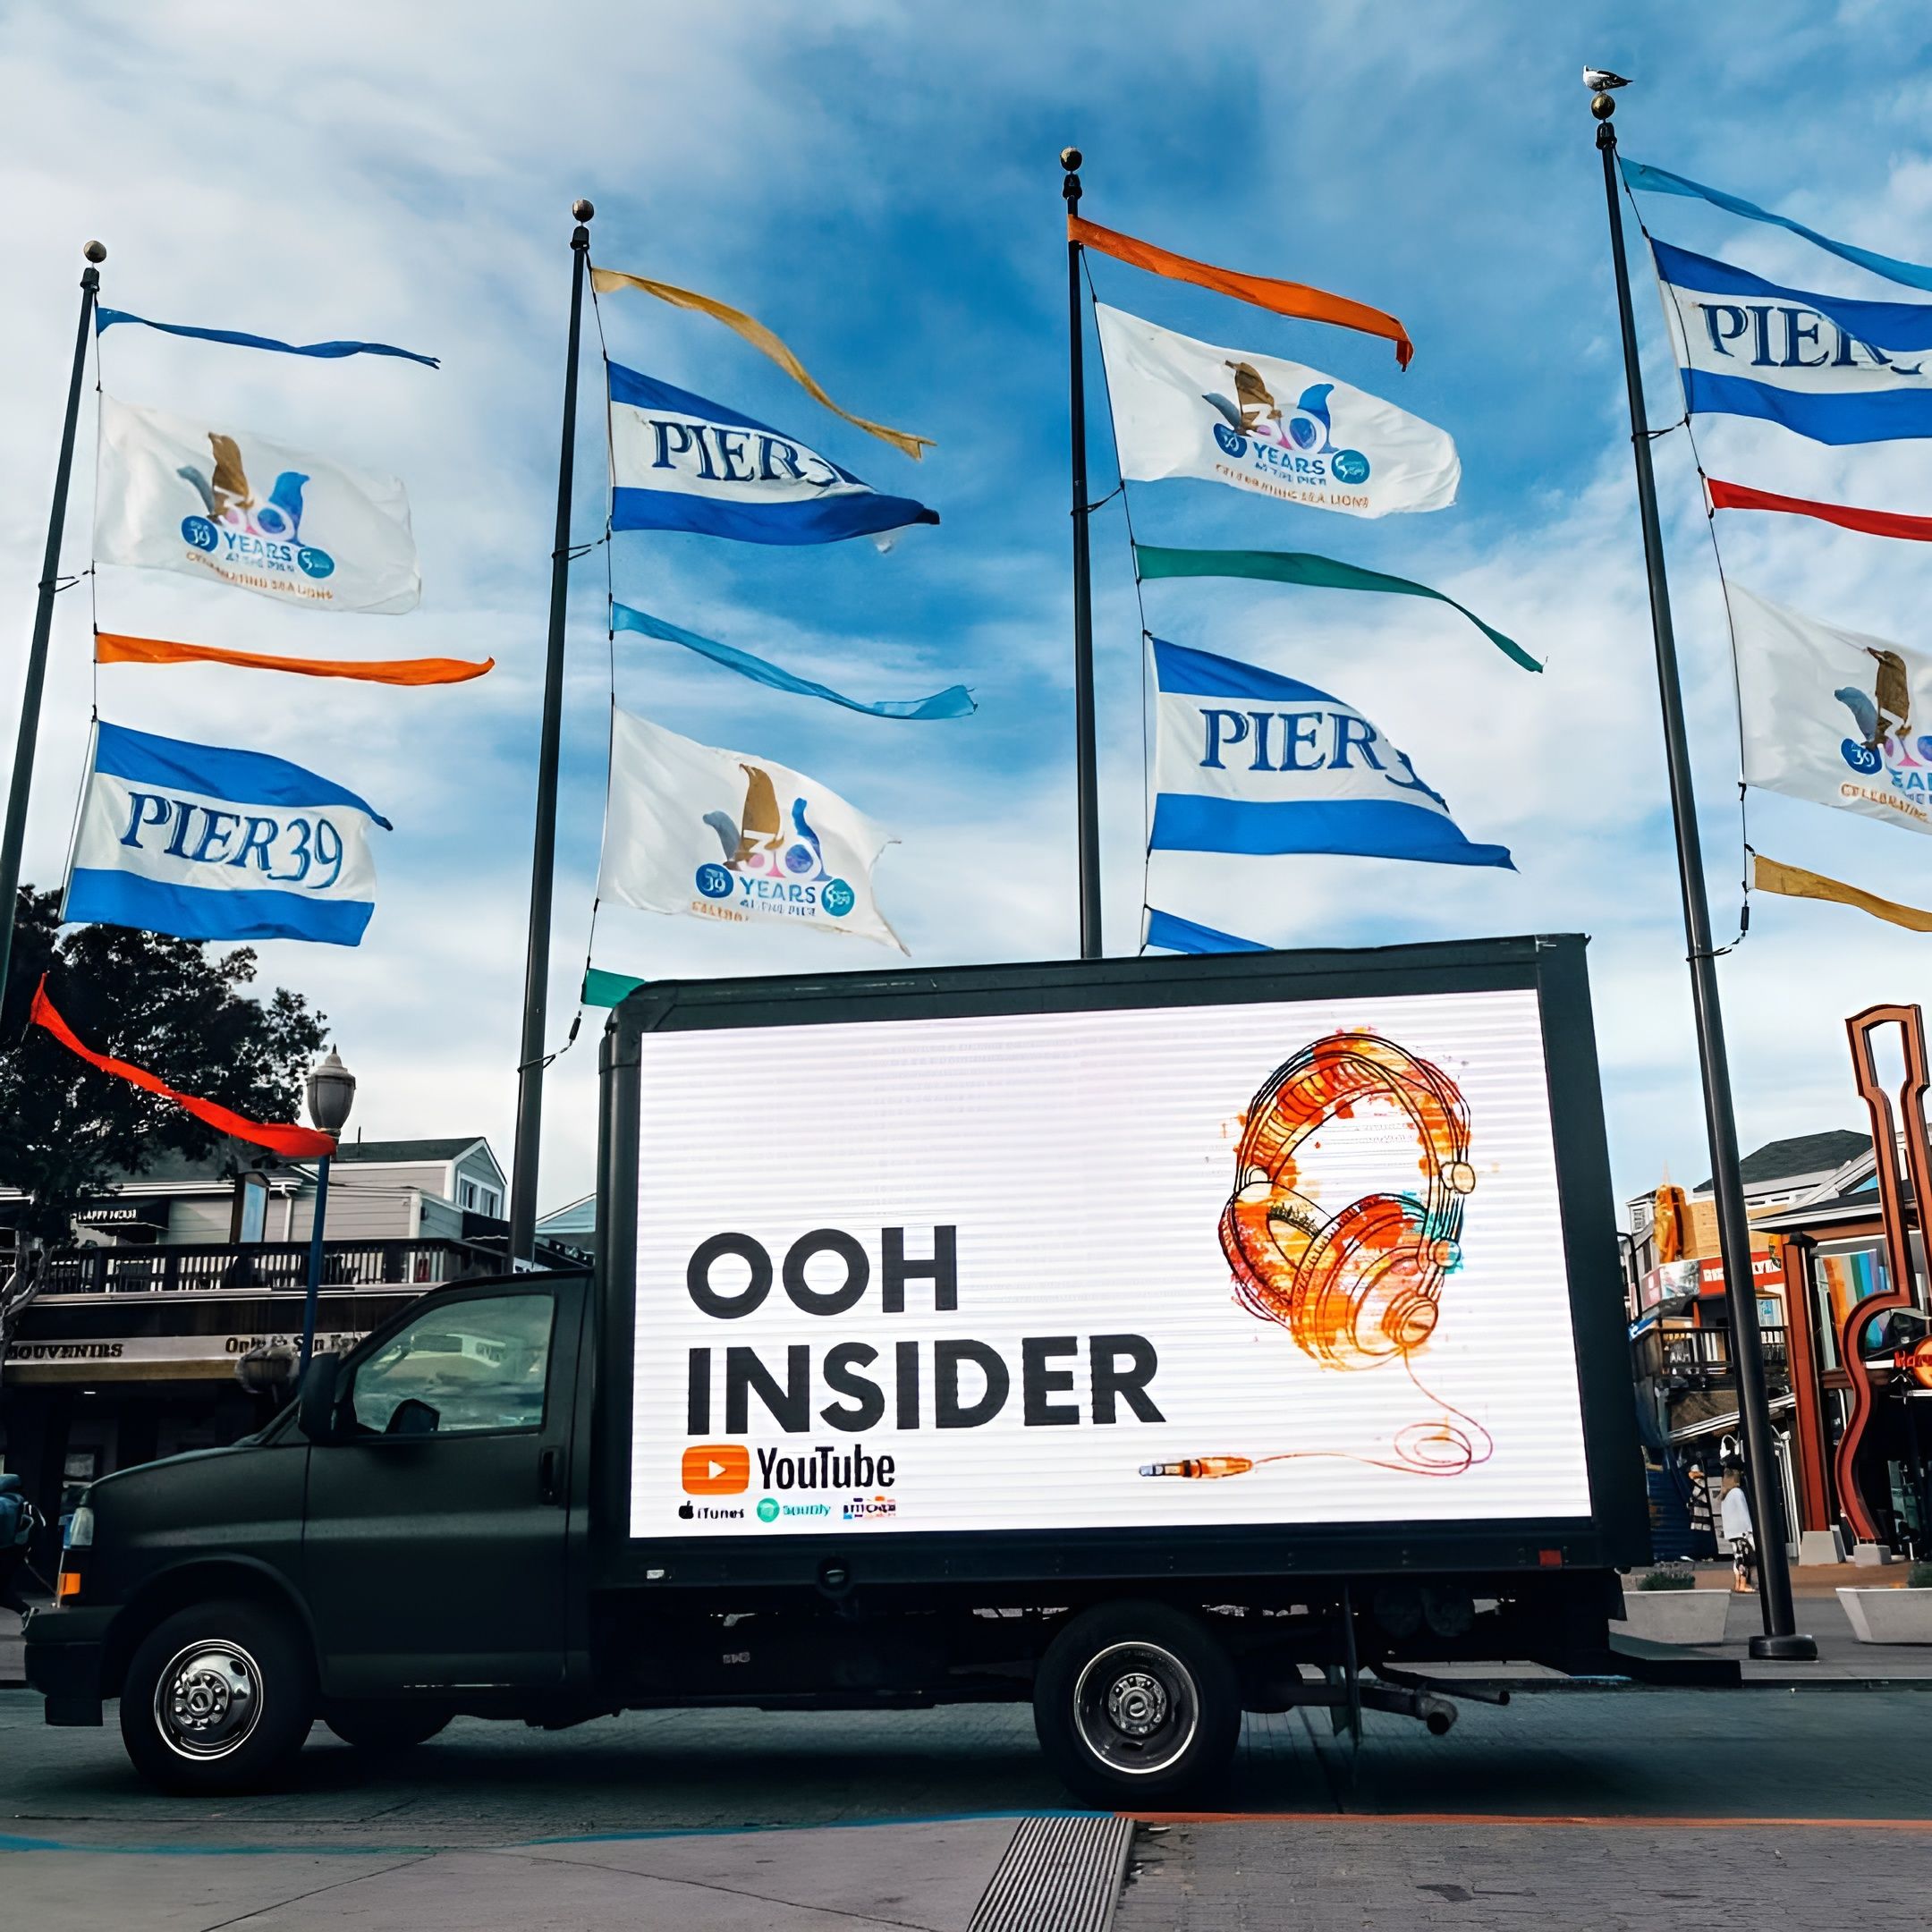 Image of a mobile billboard truck on a city street